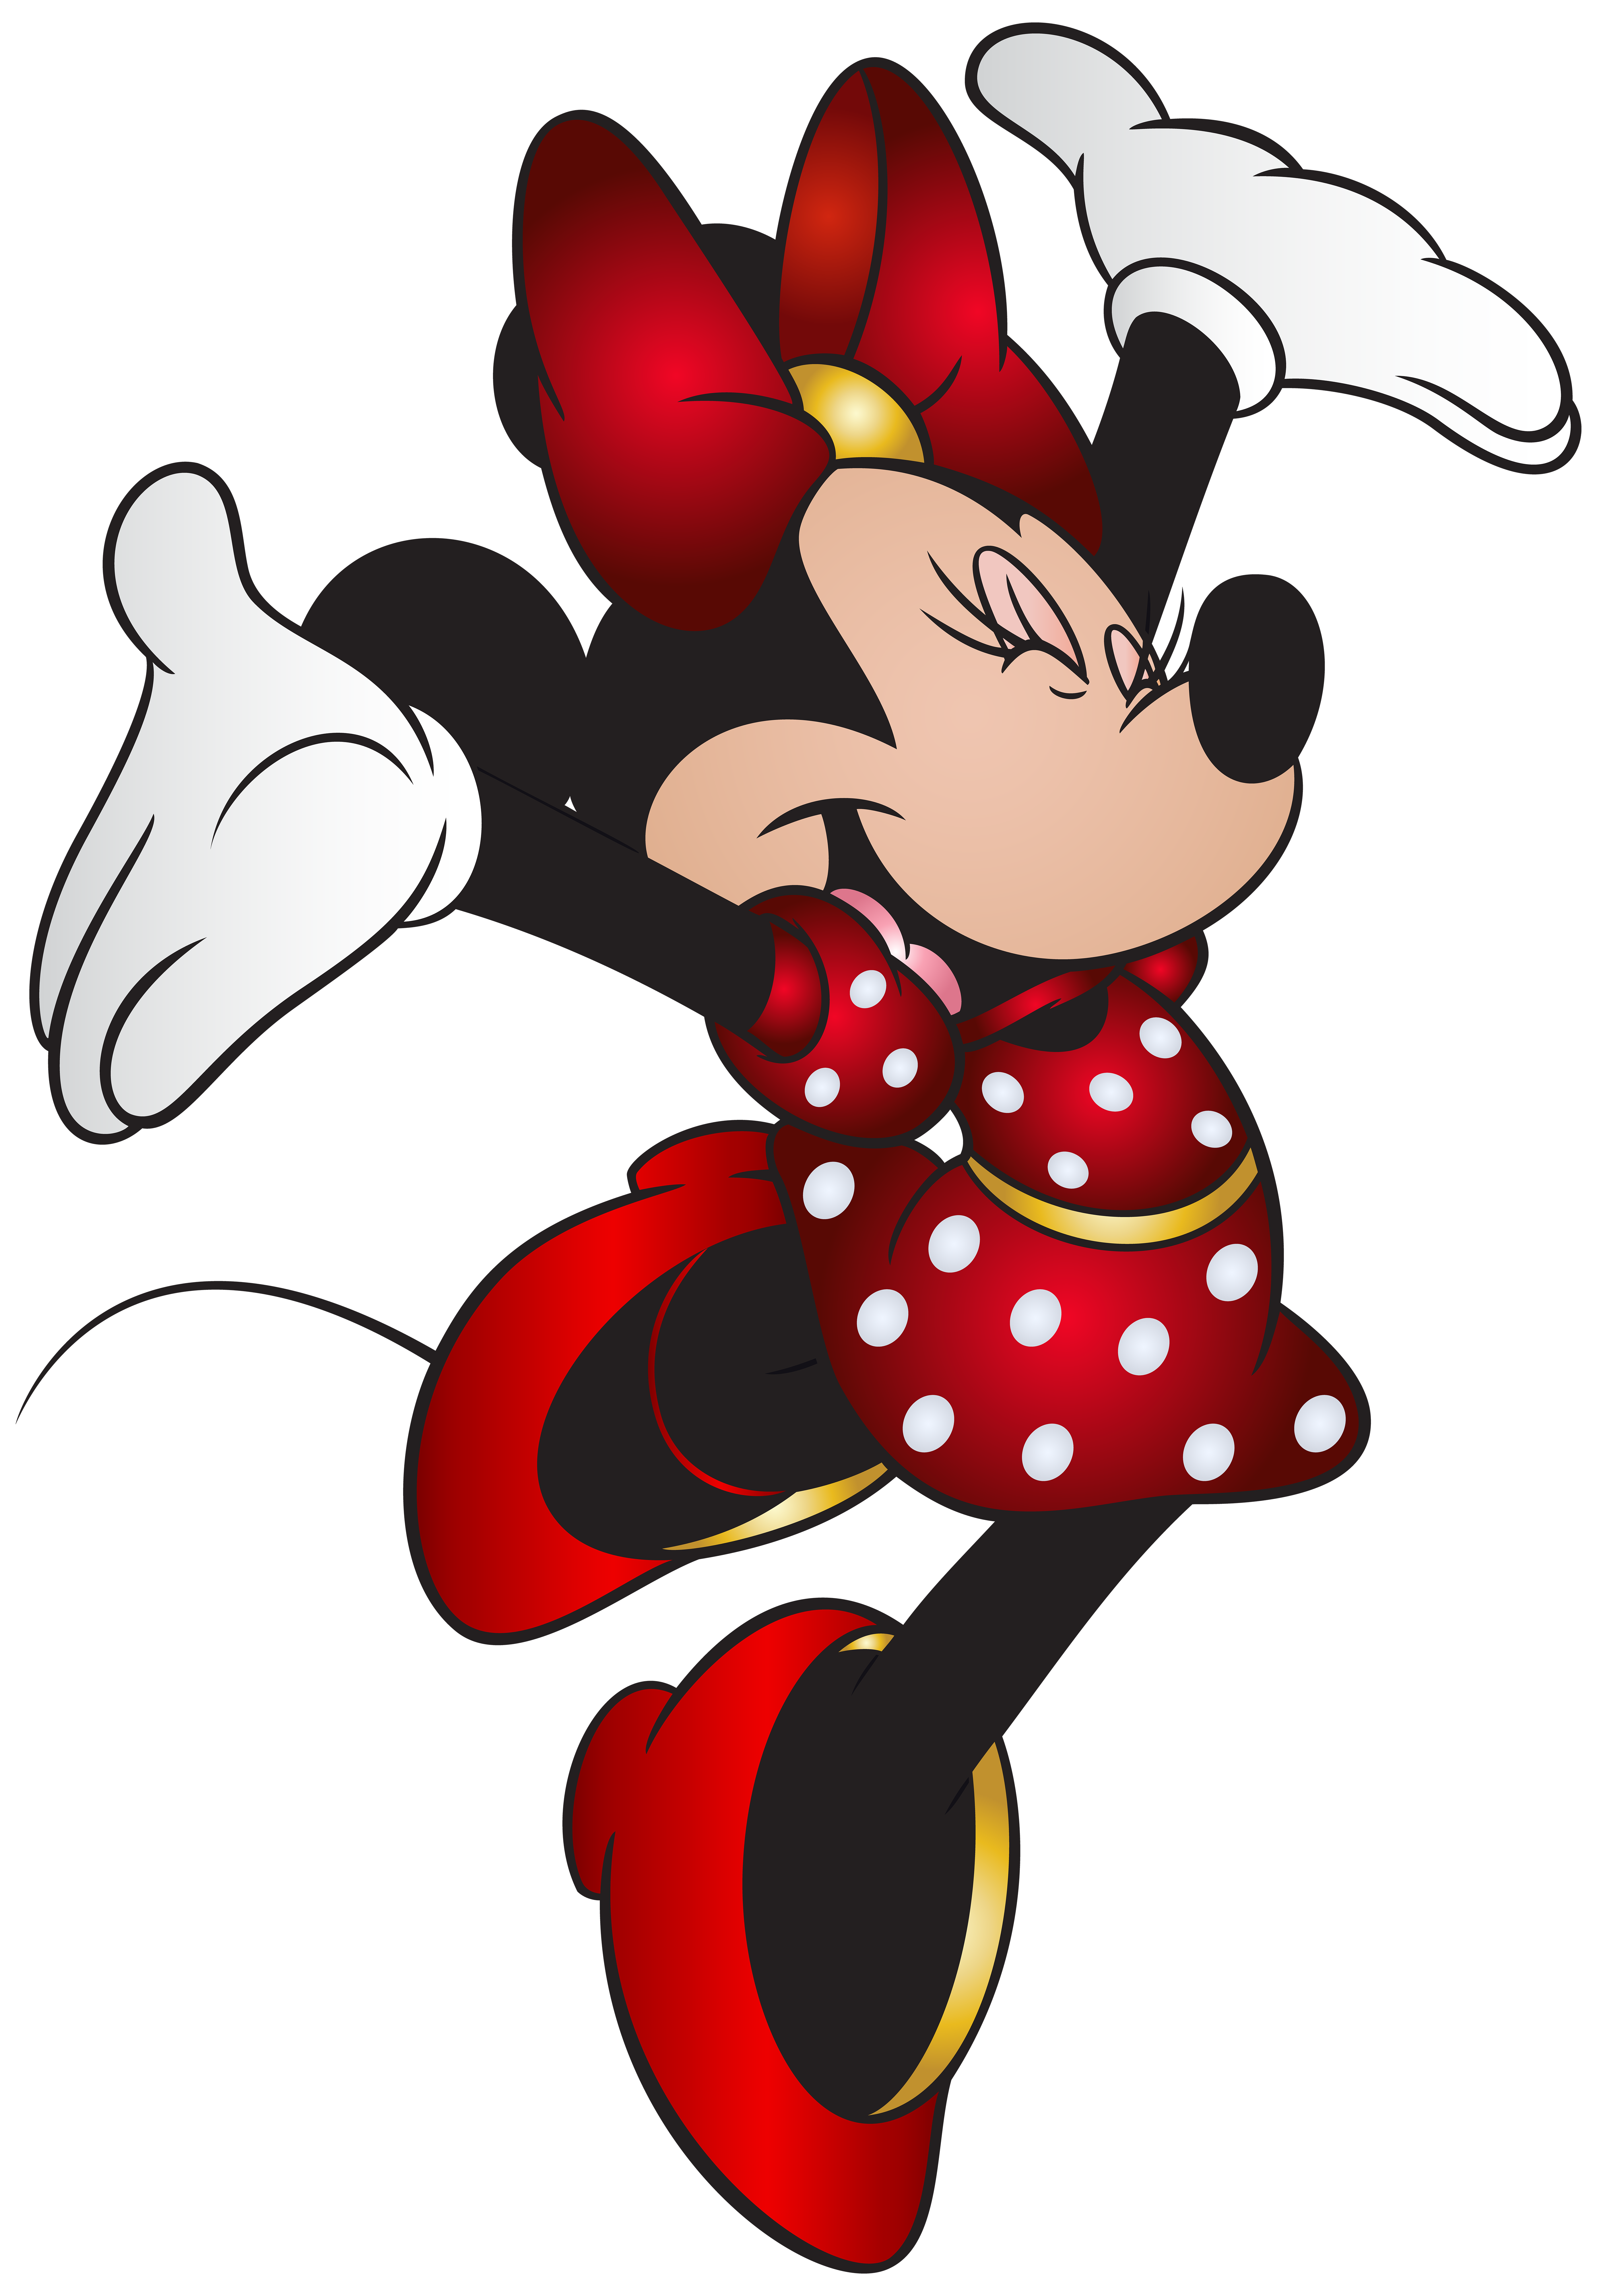 Transparent Minnie Mouse Png Tone Diamond Rings